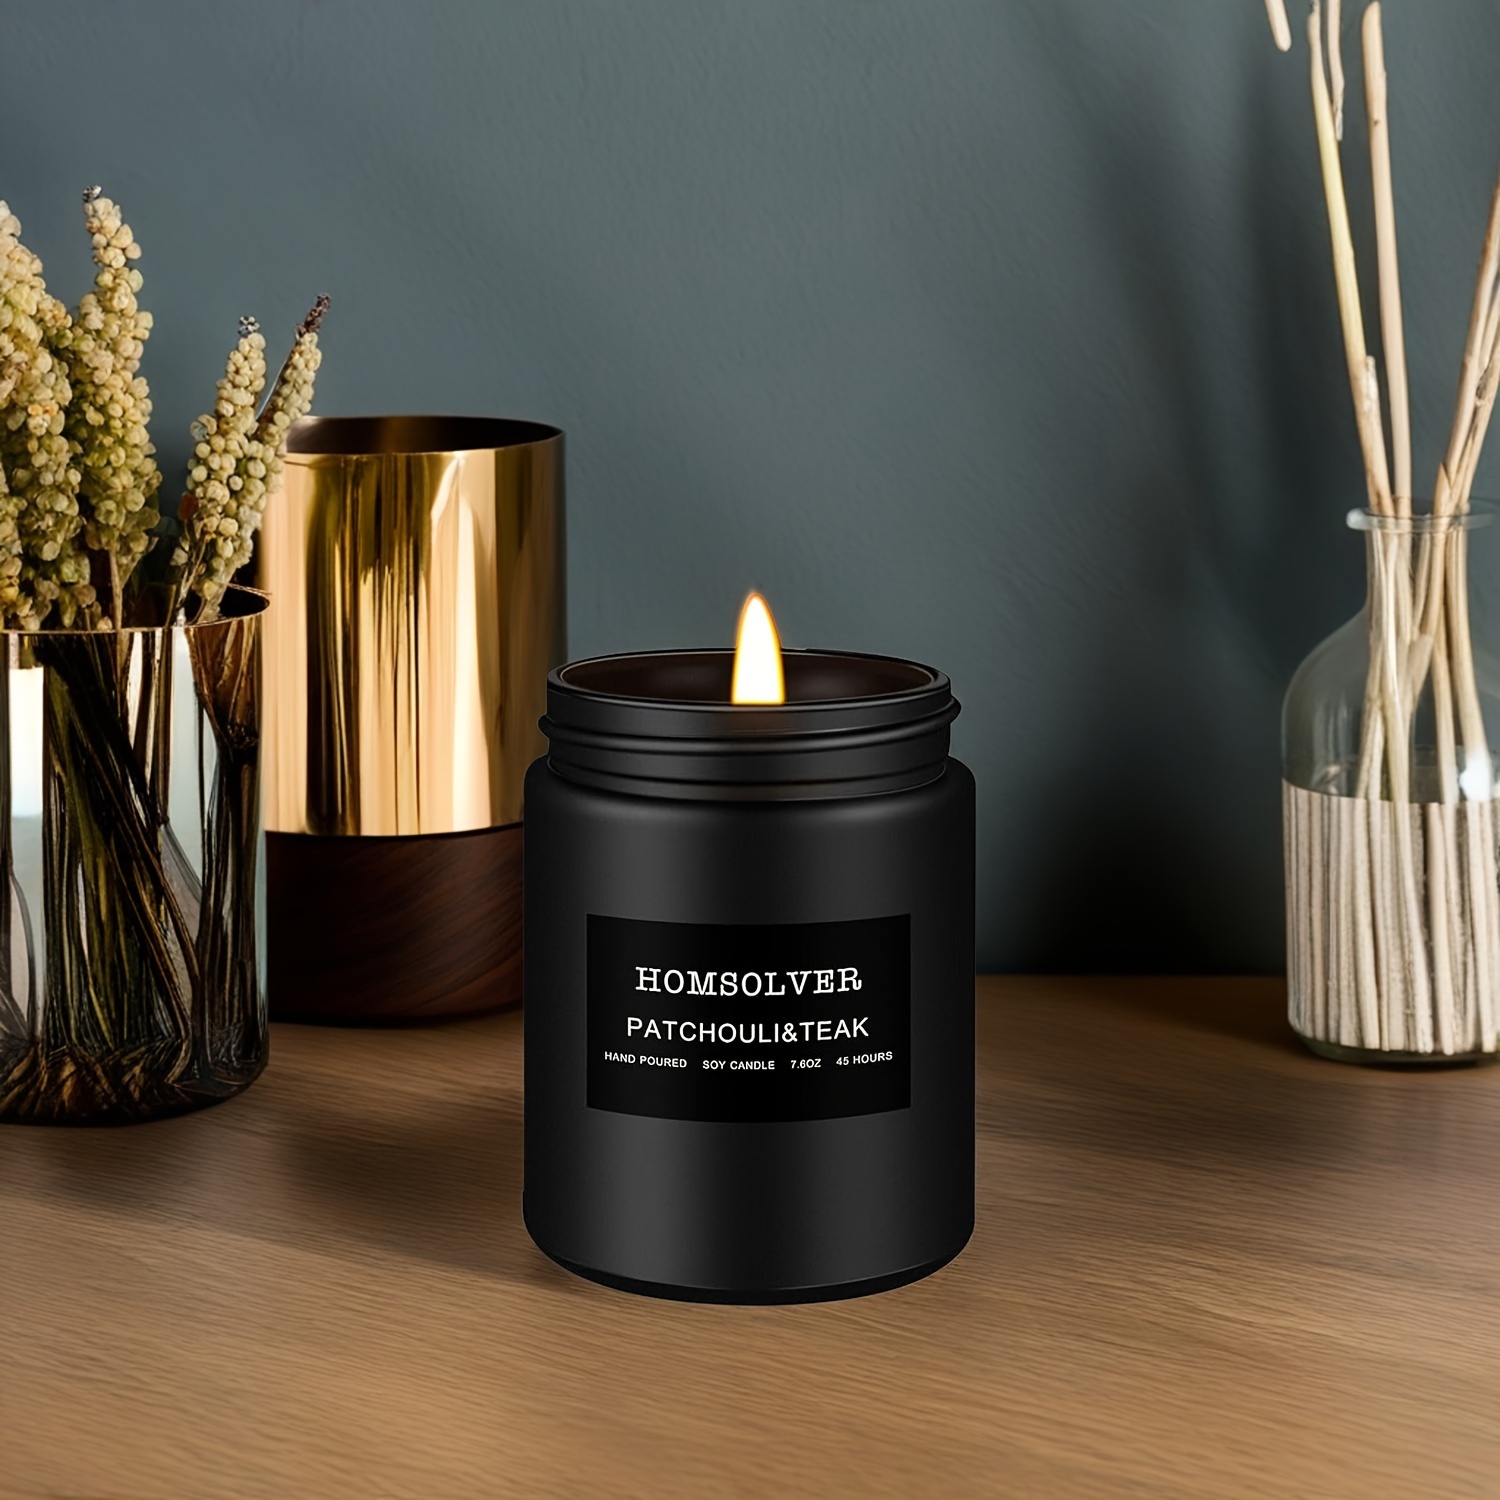 

Scented Candles For Men, Patchouli & Teak Candles, Natural Soy Candles, Home Decor Candle, 50 Hour Burn, Candles For Home Scented, Patchouli Candle In Black Jar